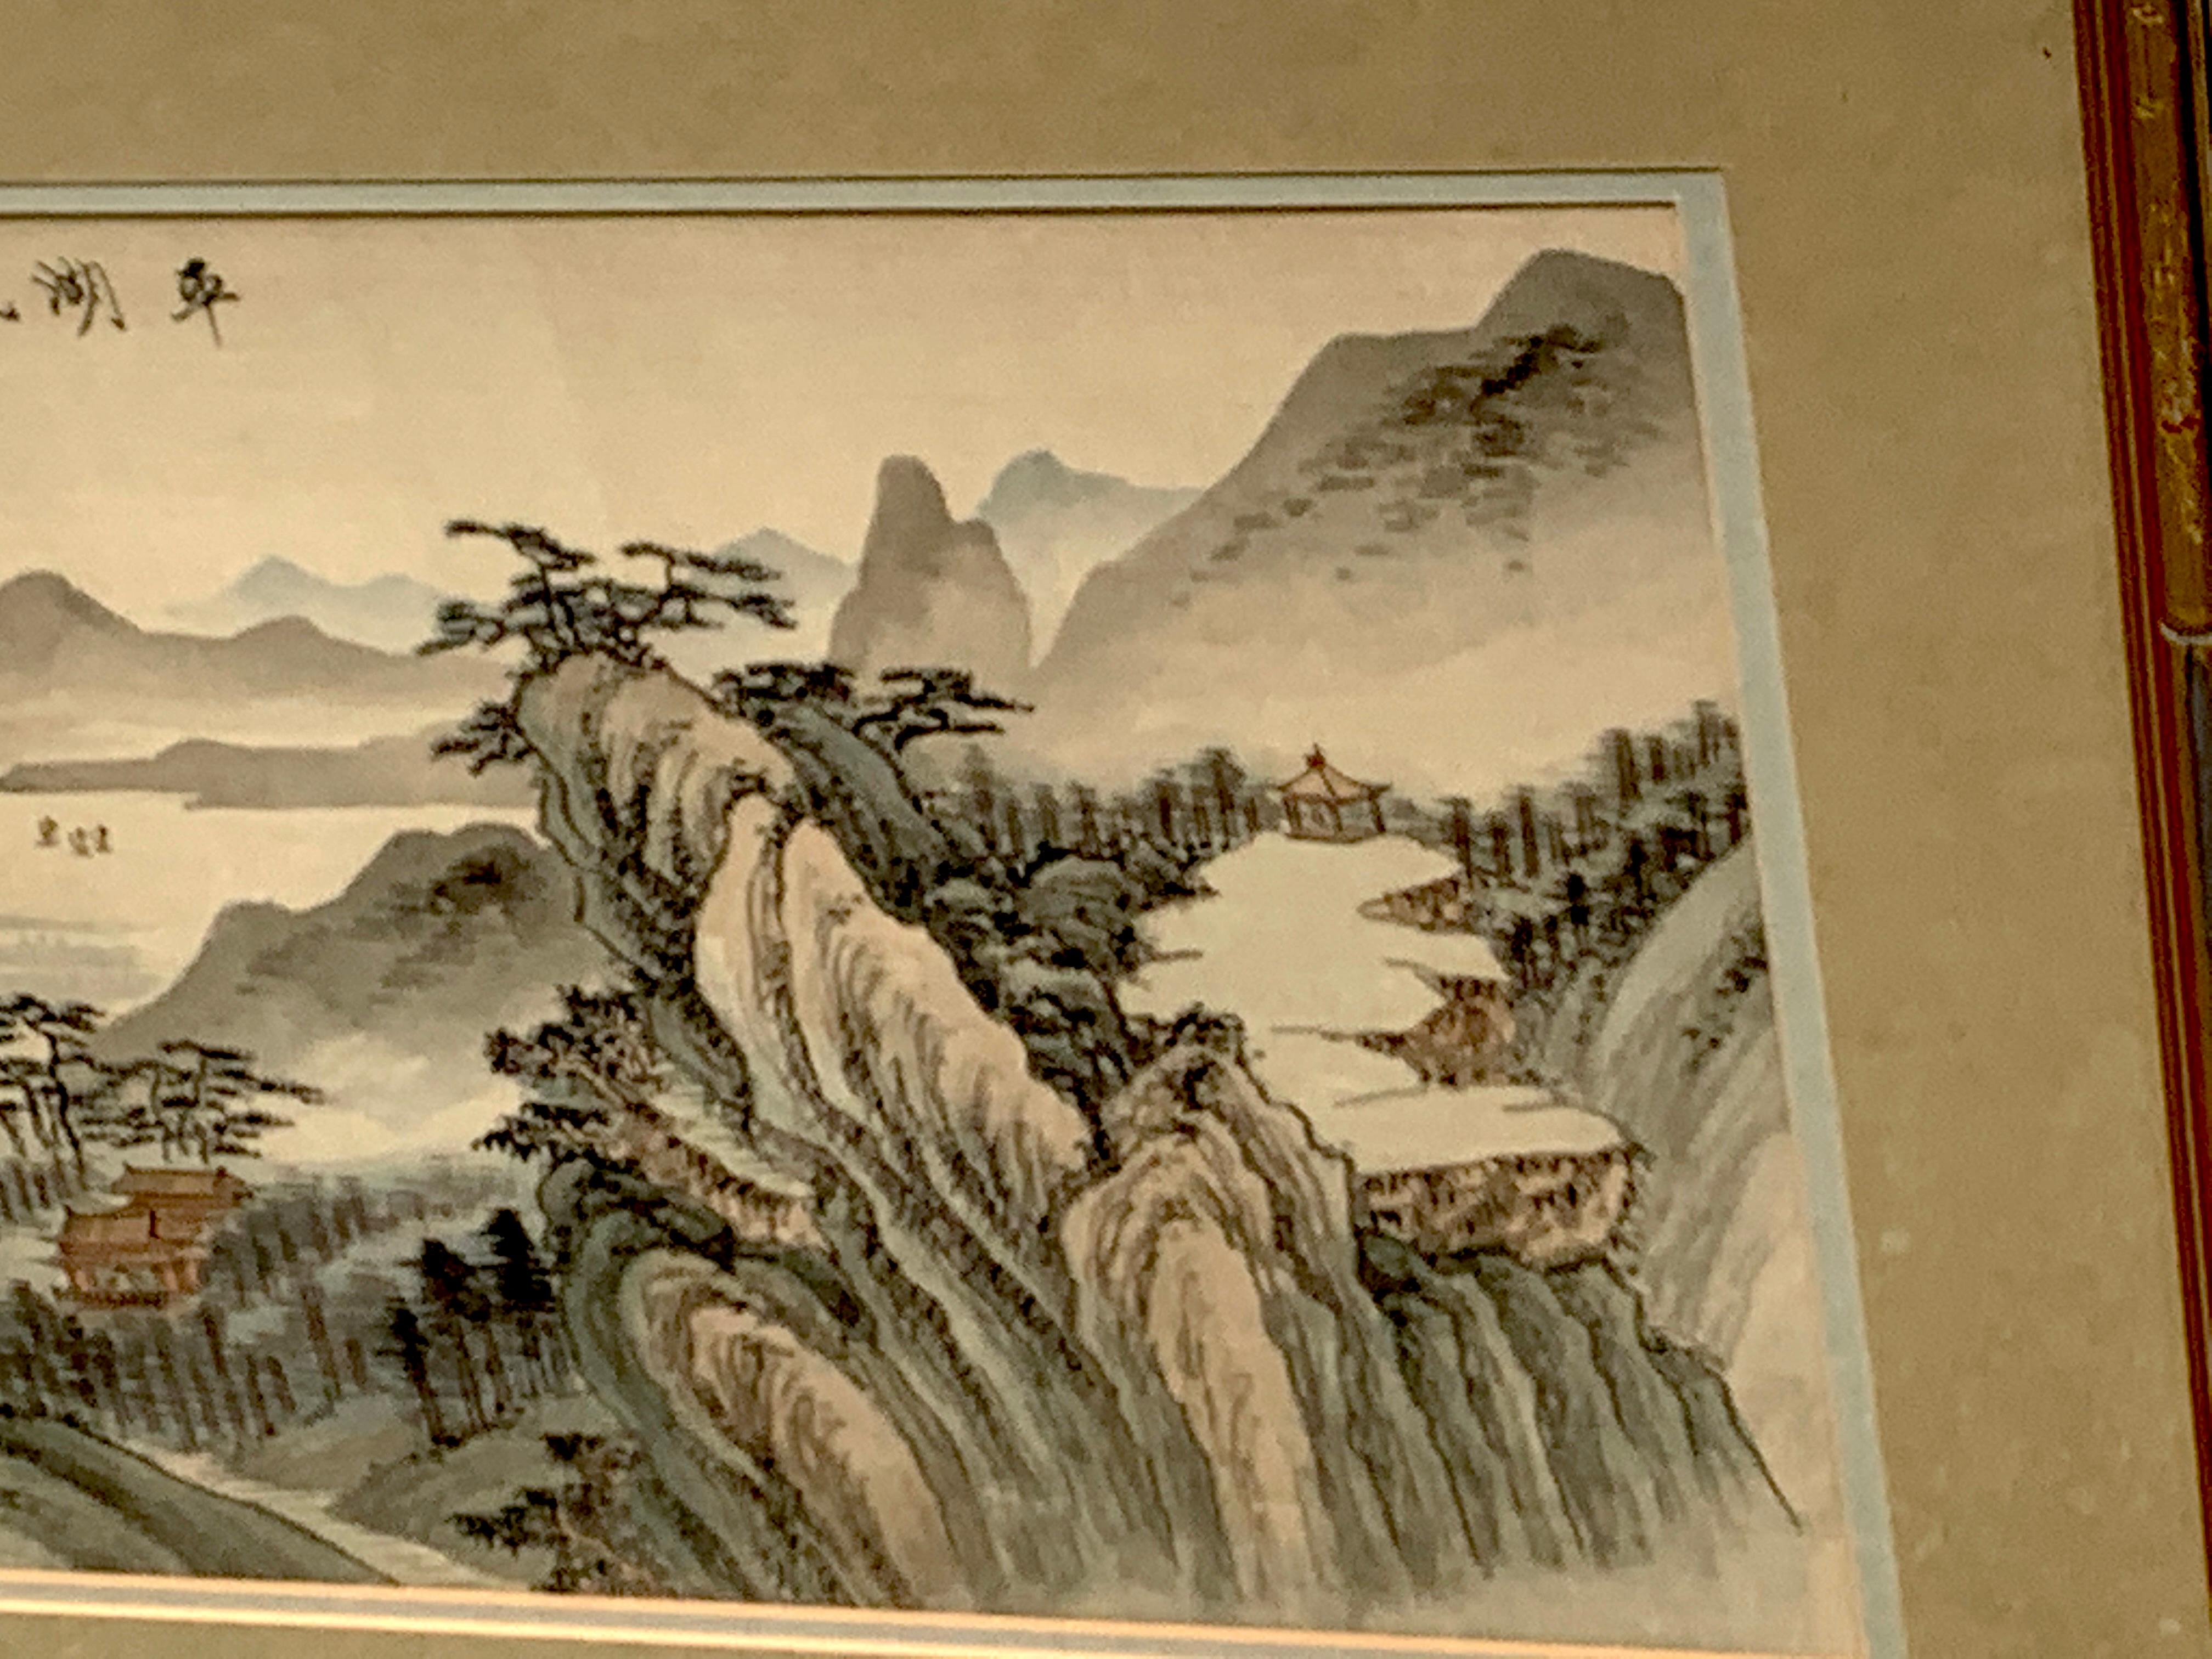 20th Century Midcentury Chinese Export Landscape Painting on Silk, White Mat